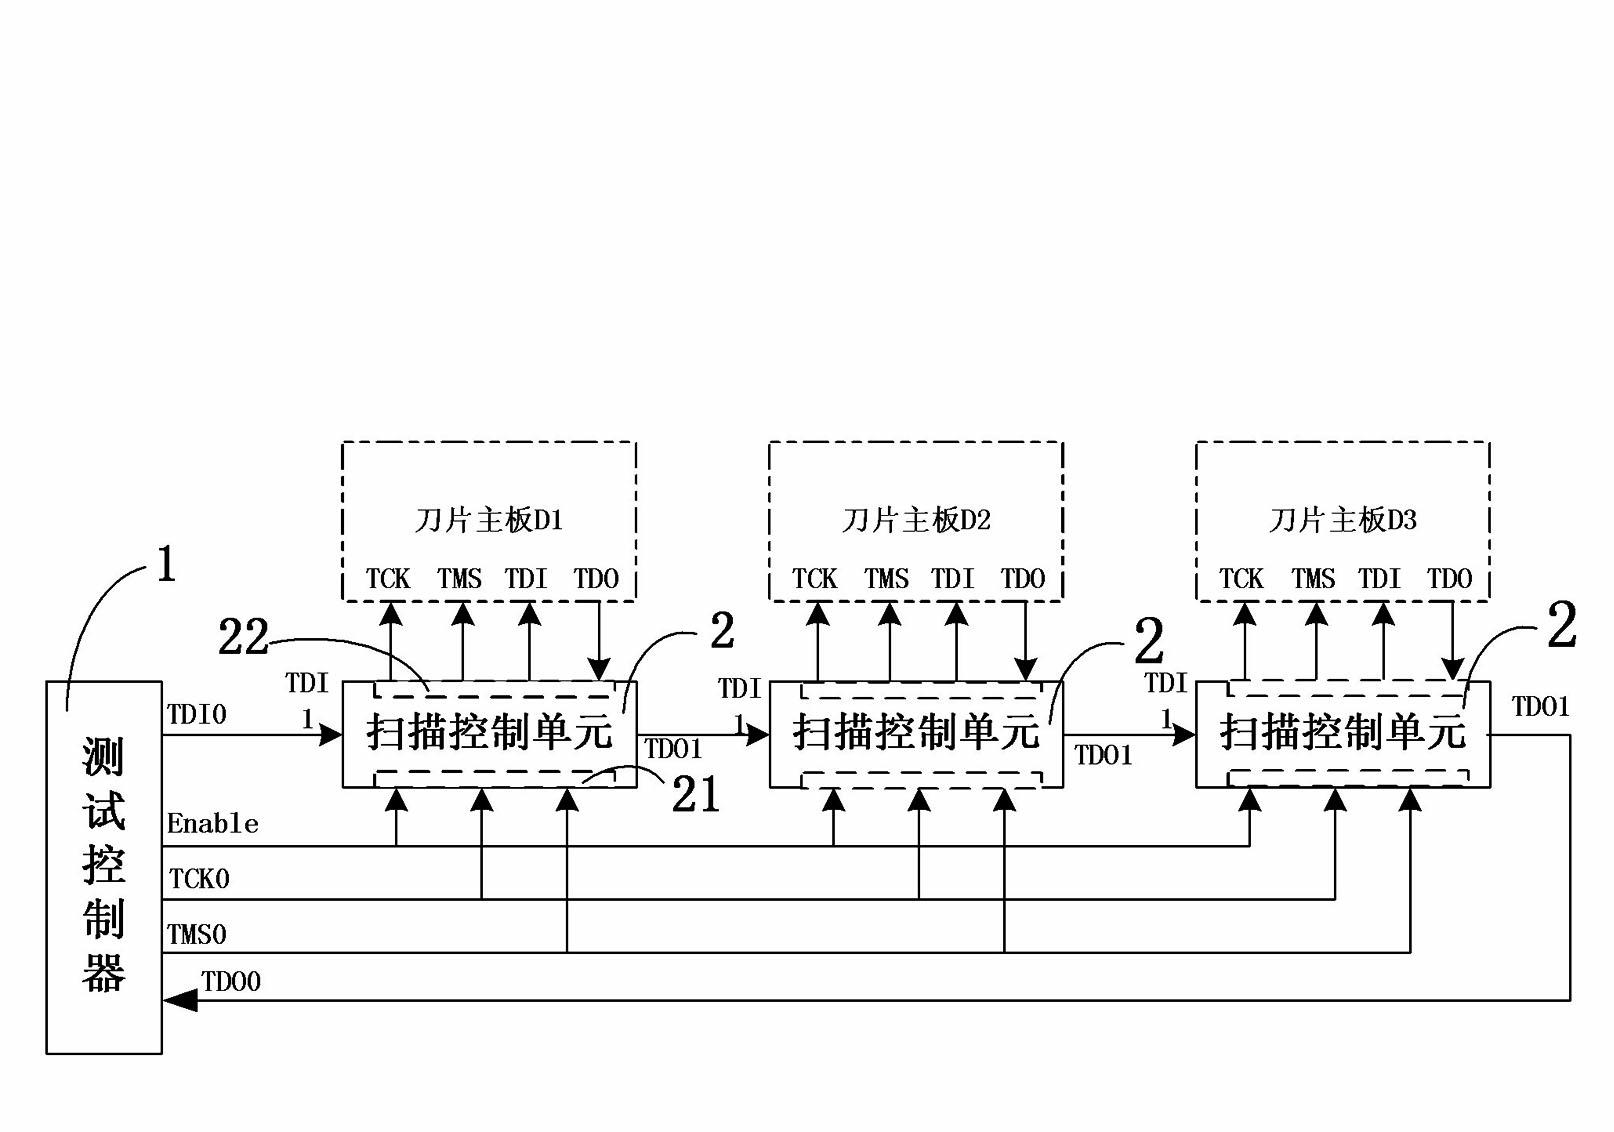 Multi-link parallel boundary scanning testing device and method